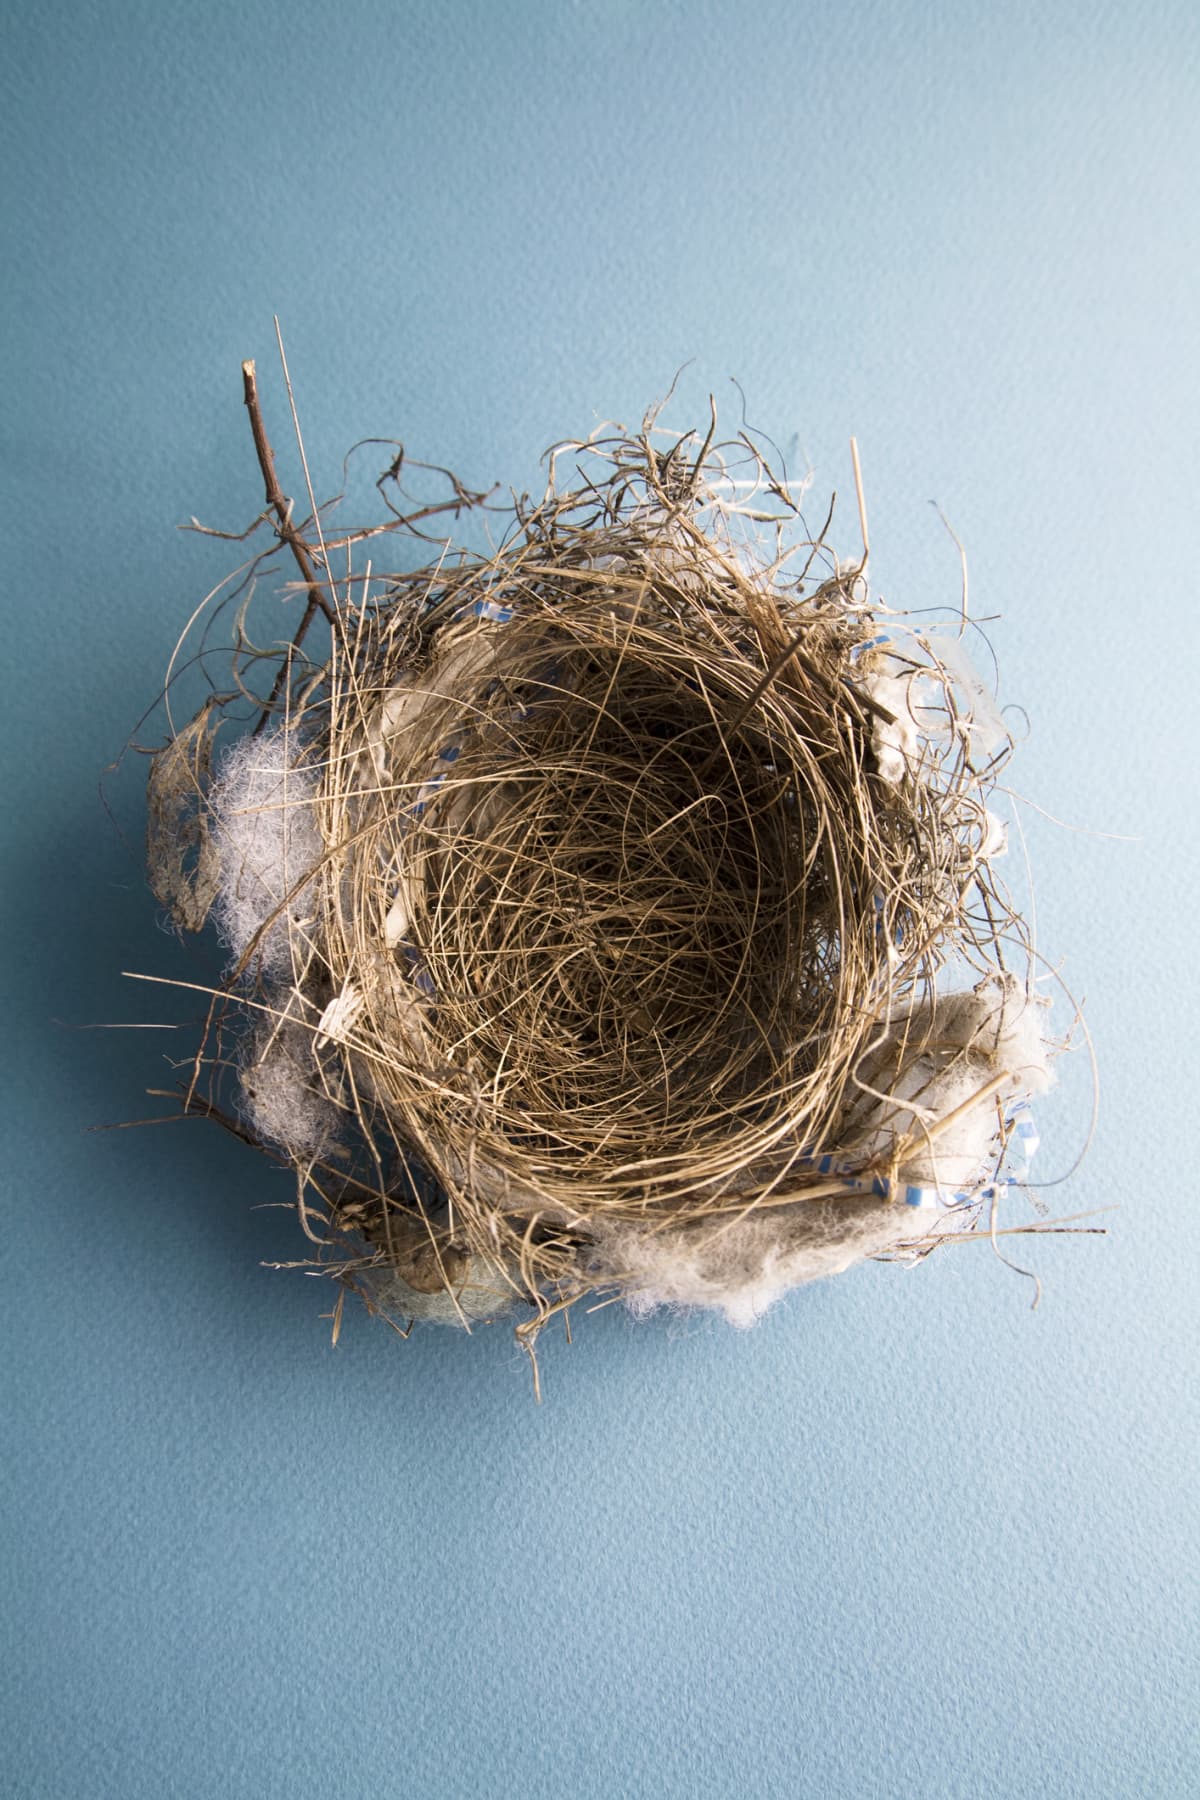 An empty bird's nest shot from above on a blue backdrop